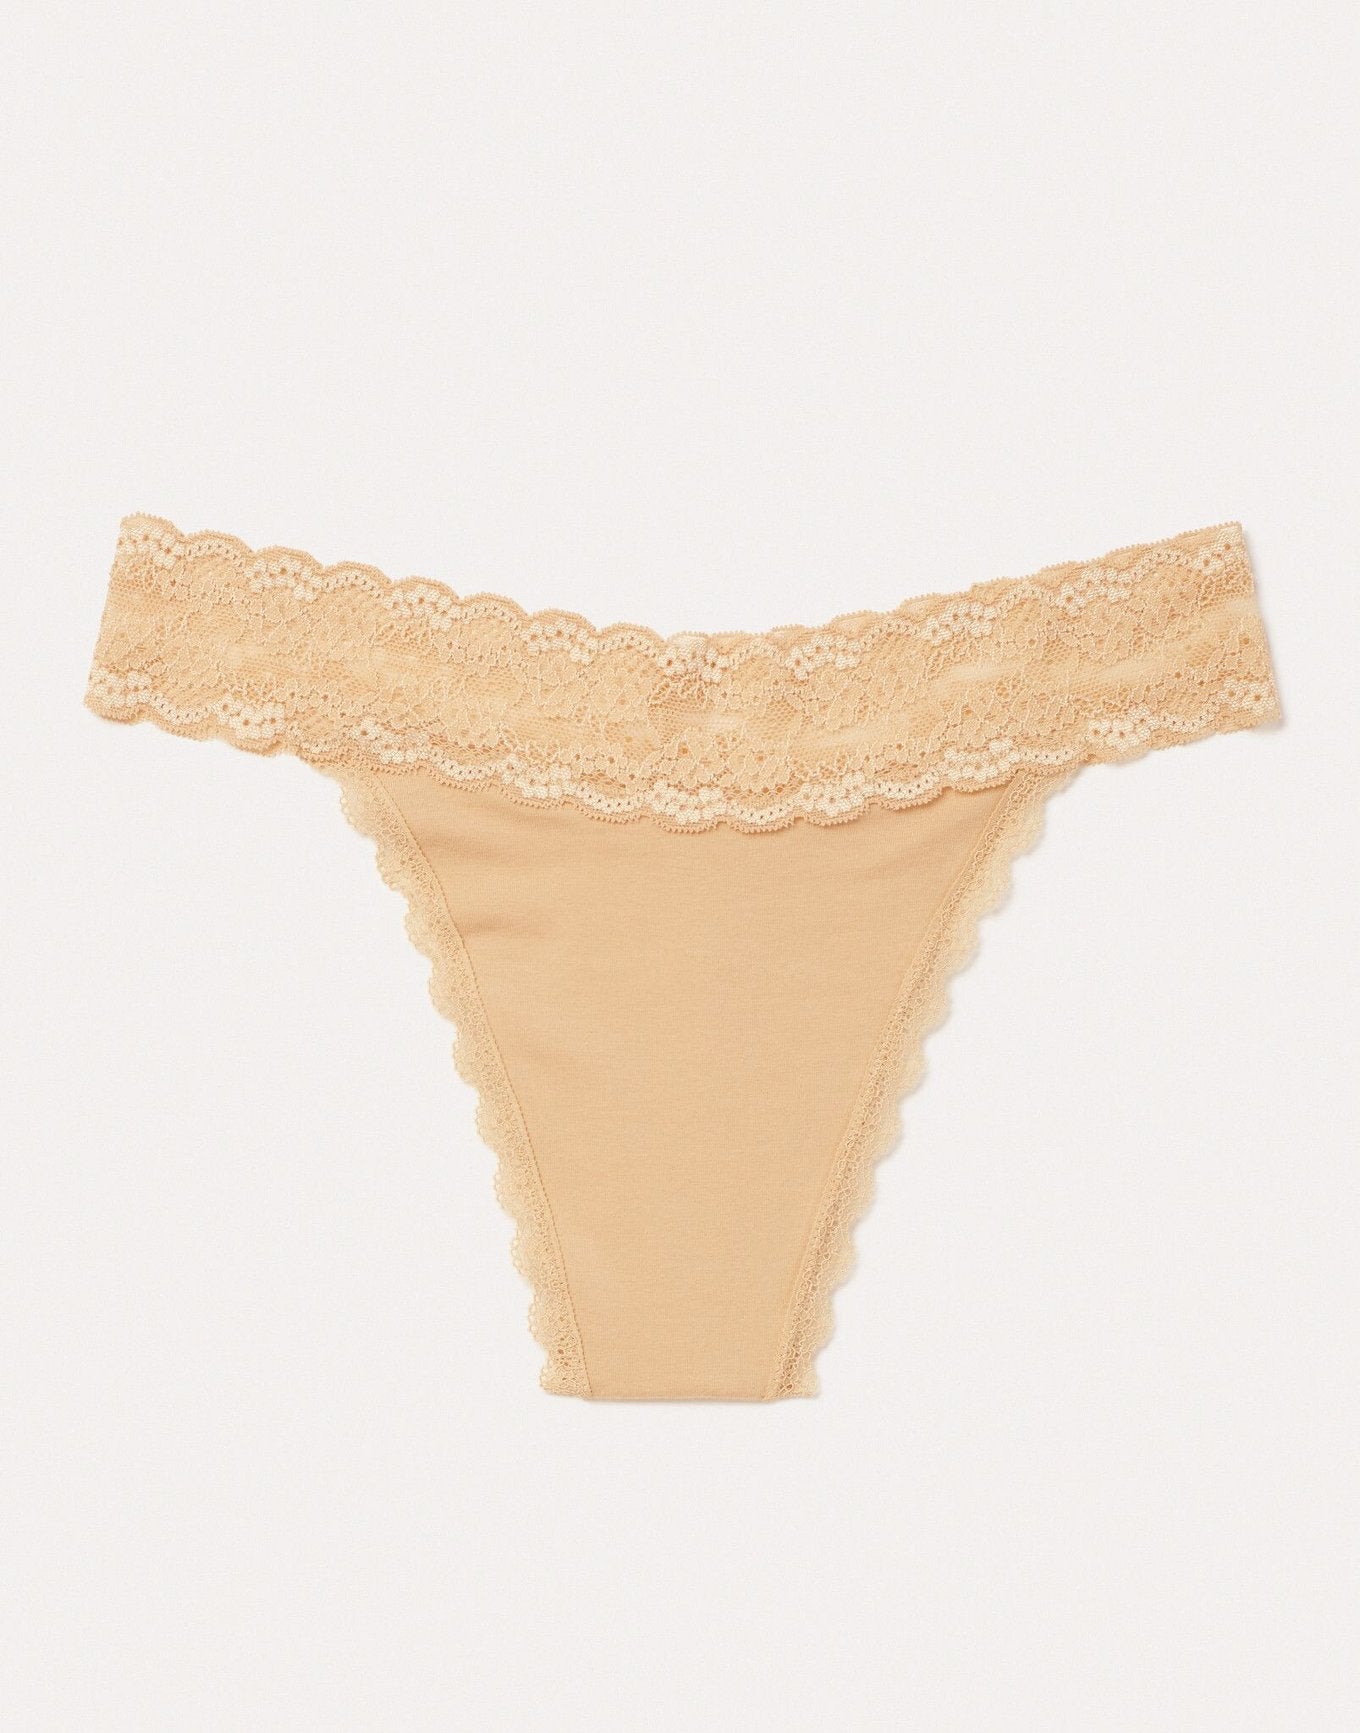 Joyja Lily period-proof panty in color Lucky Fortune Cookie and shape thong